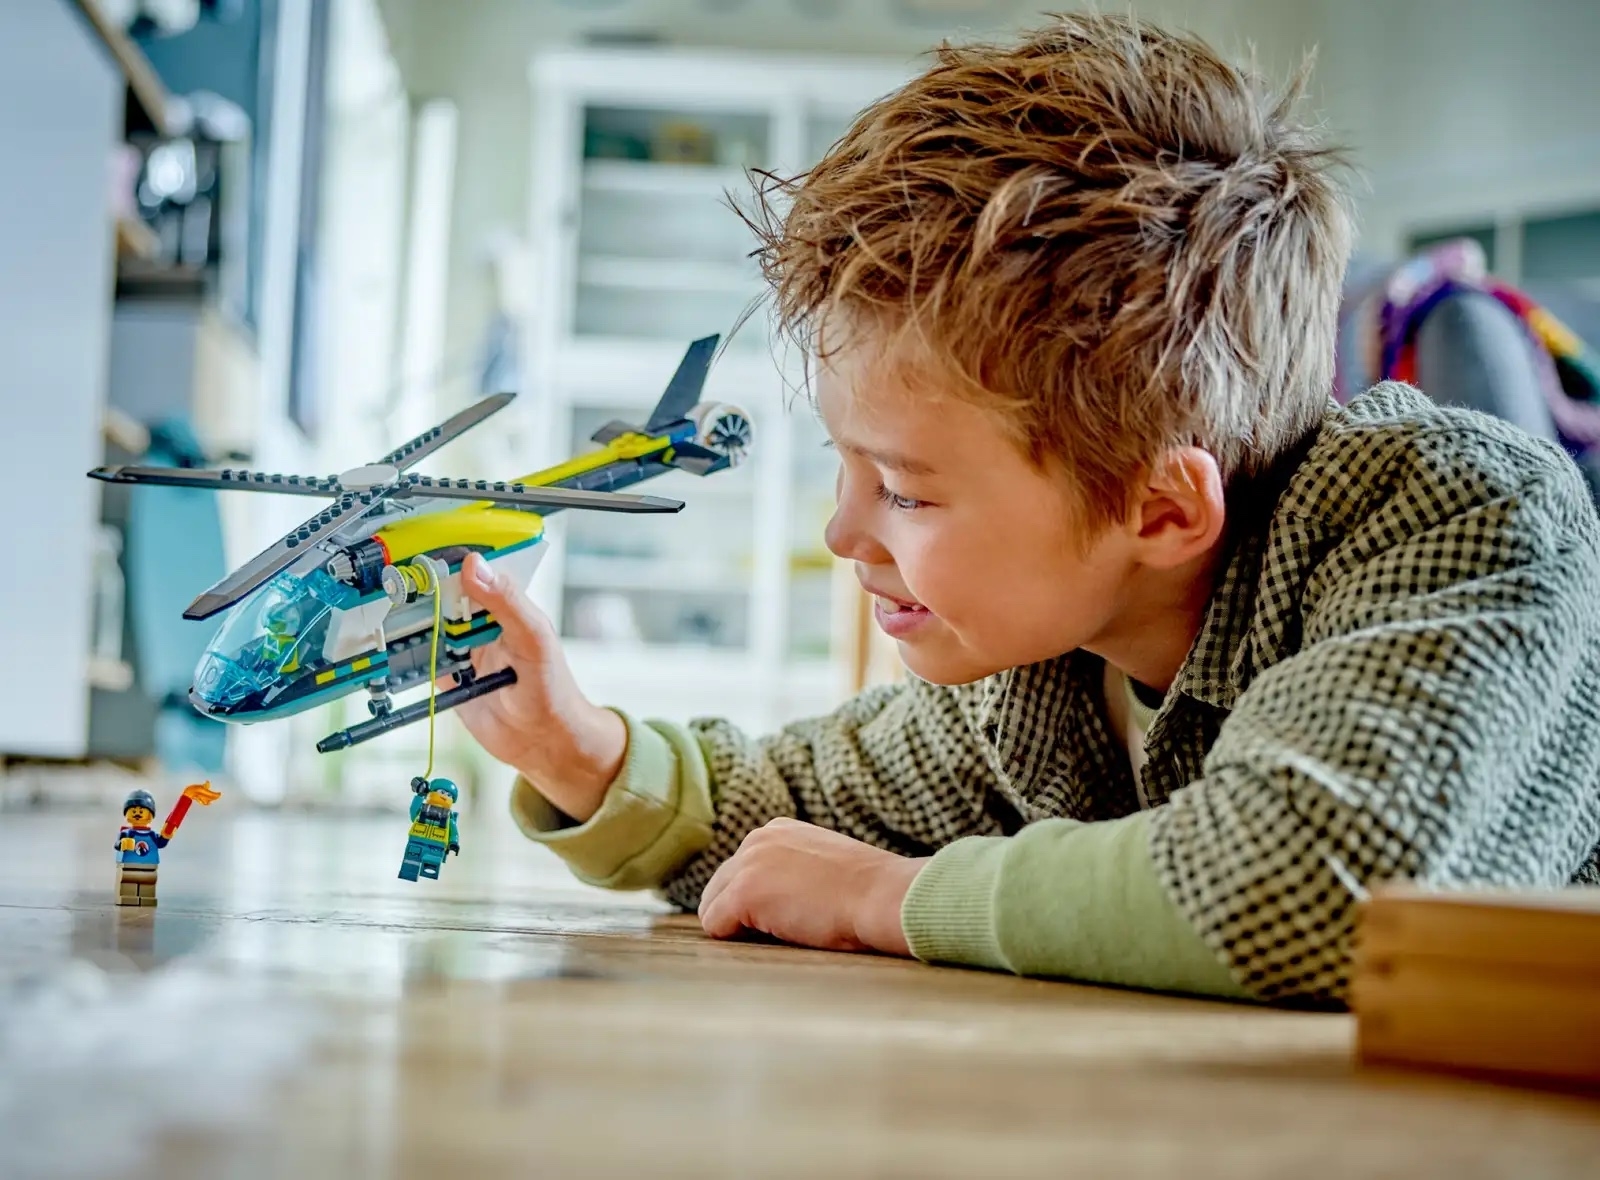 A young boy plays with a LEGO helicopter